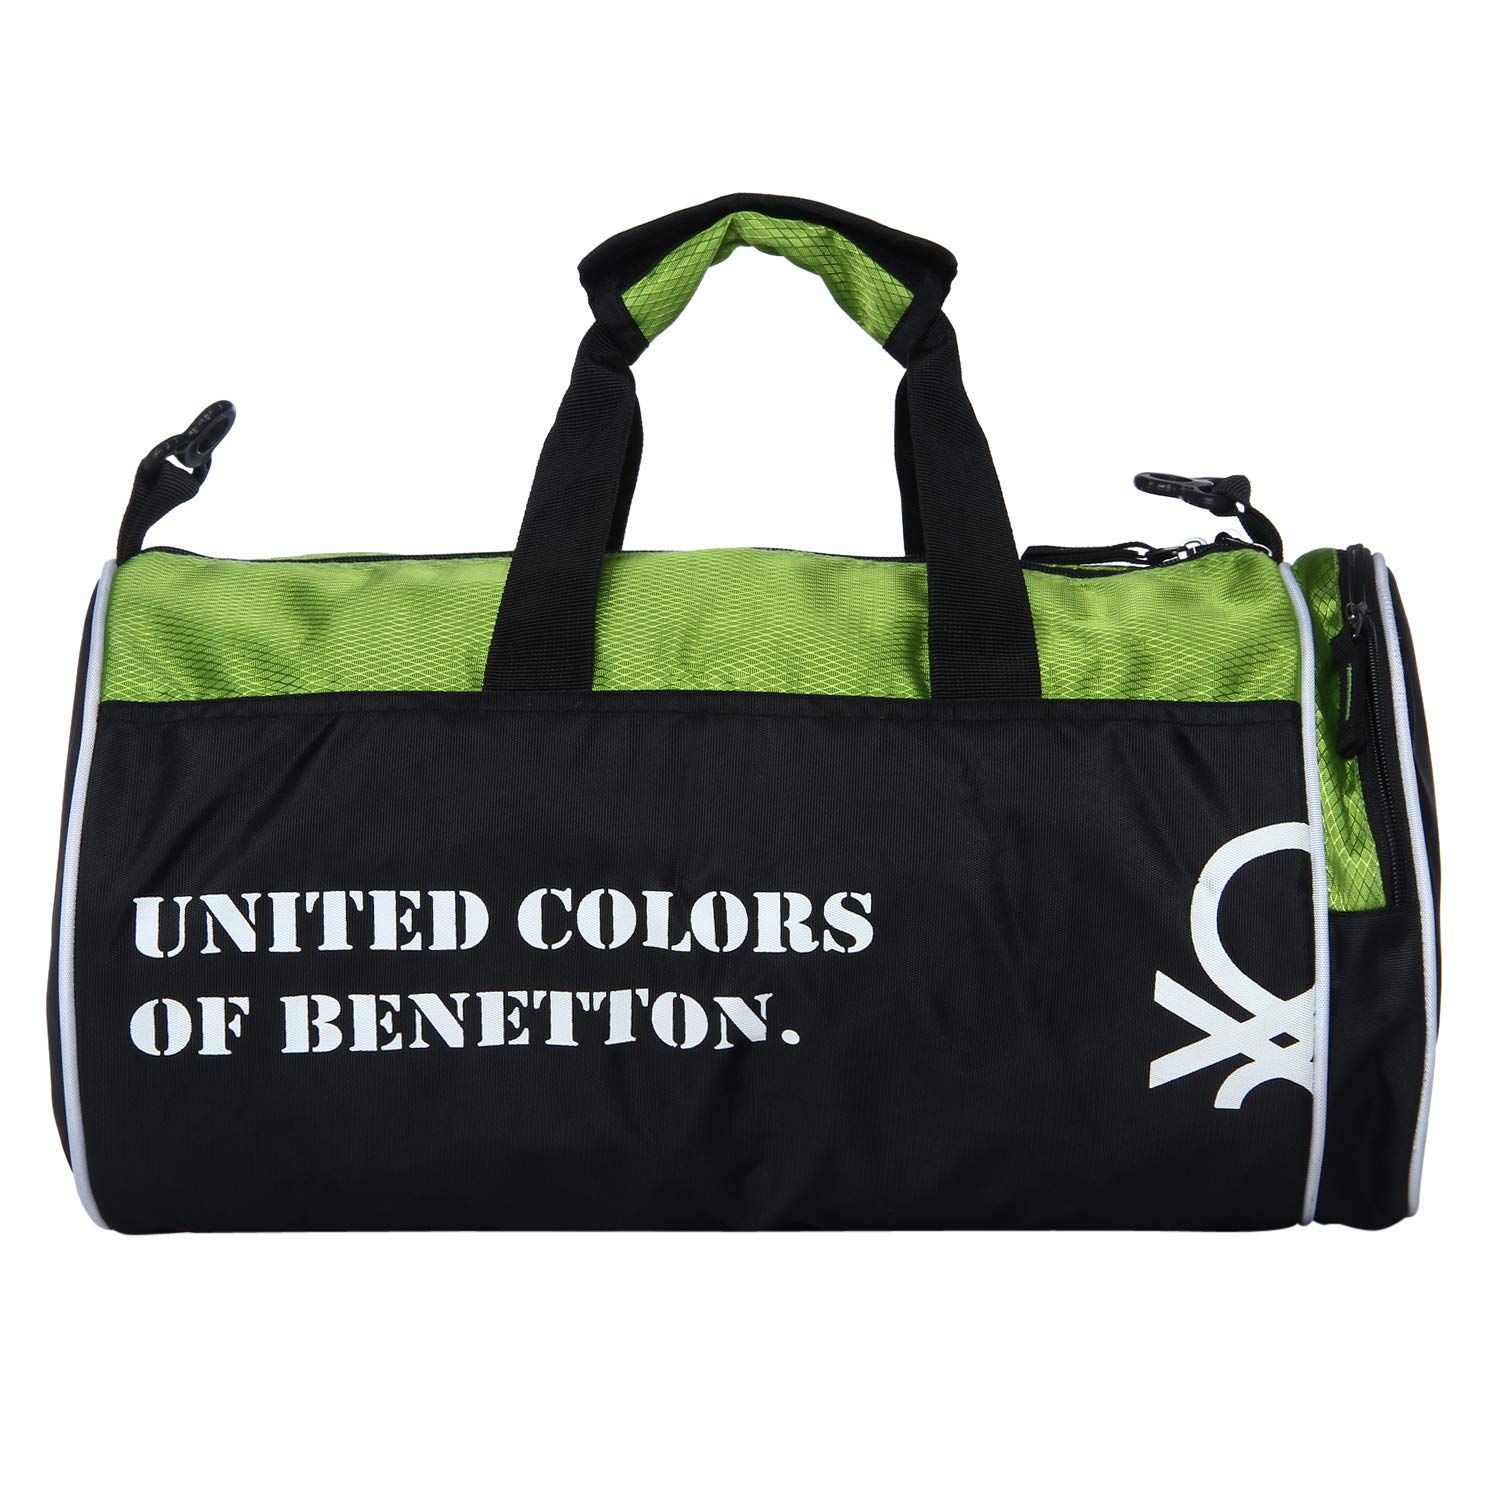 (Prime Eligible)Amazon- Buy United Colors of Benetton Gym Bag at upto ...